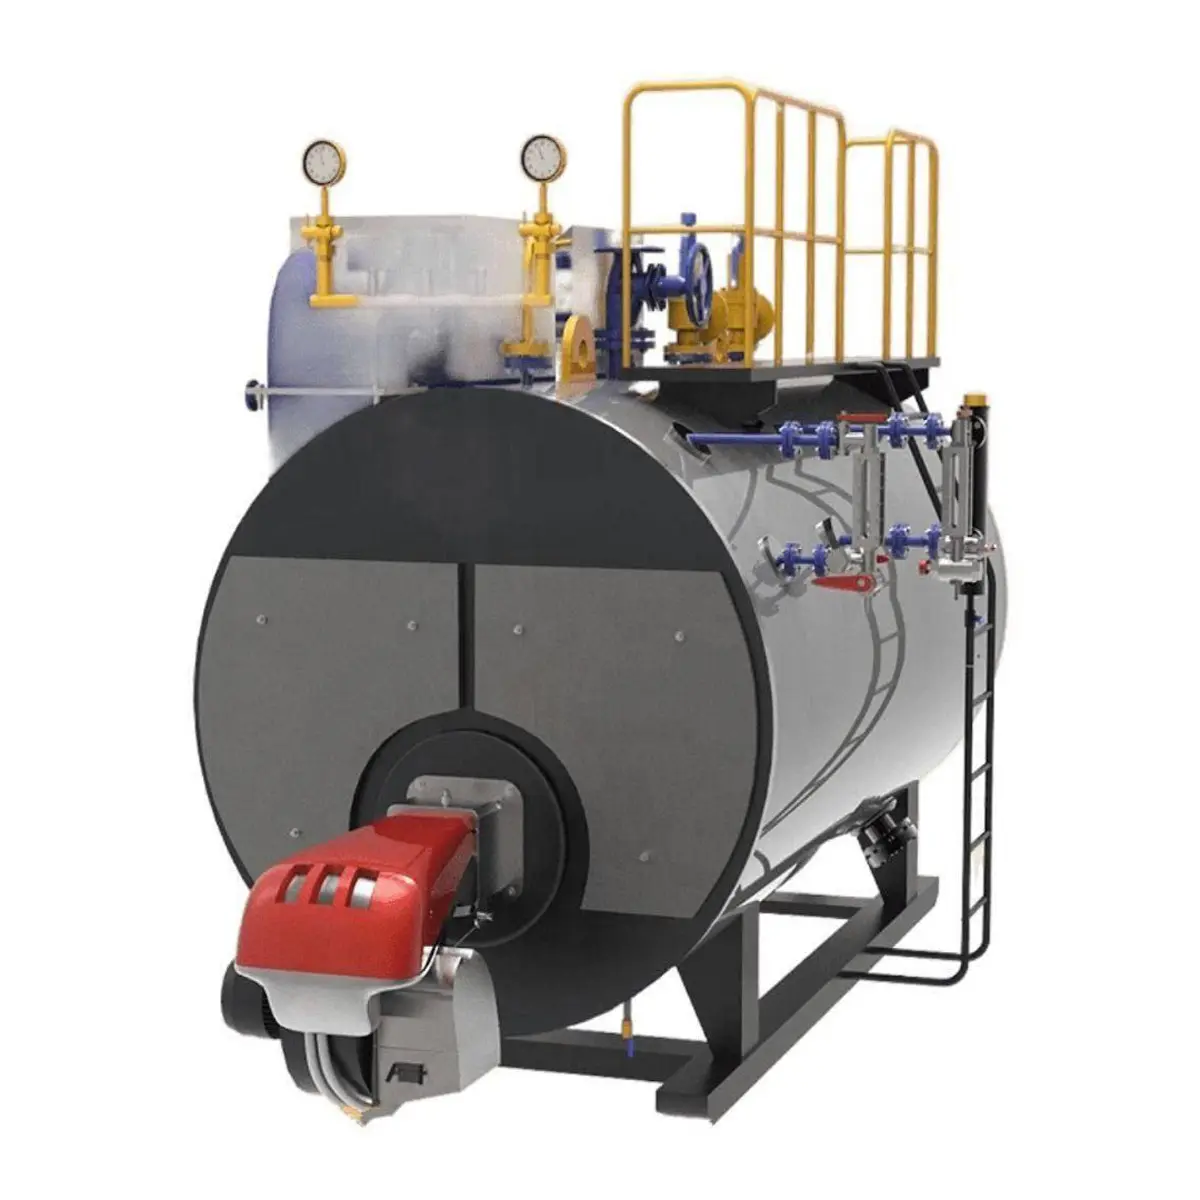 Good prices industrial steam boiler 300 kg per hour produced in Uzbekistan boilers for sale